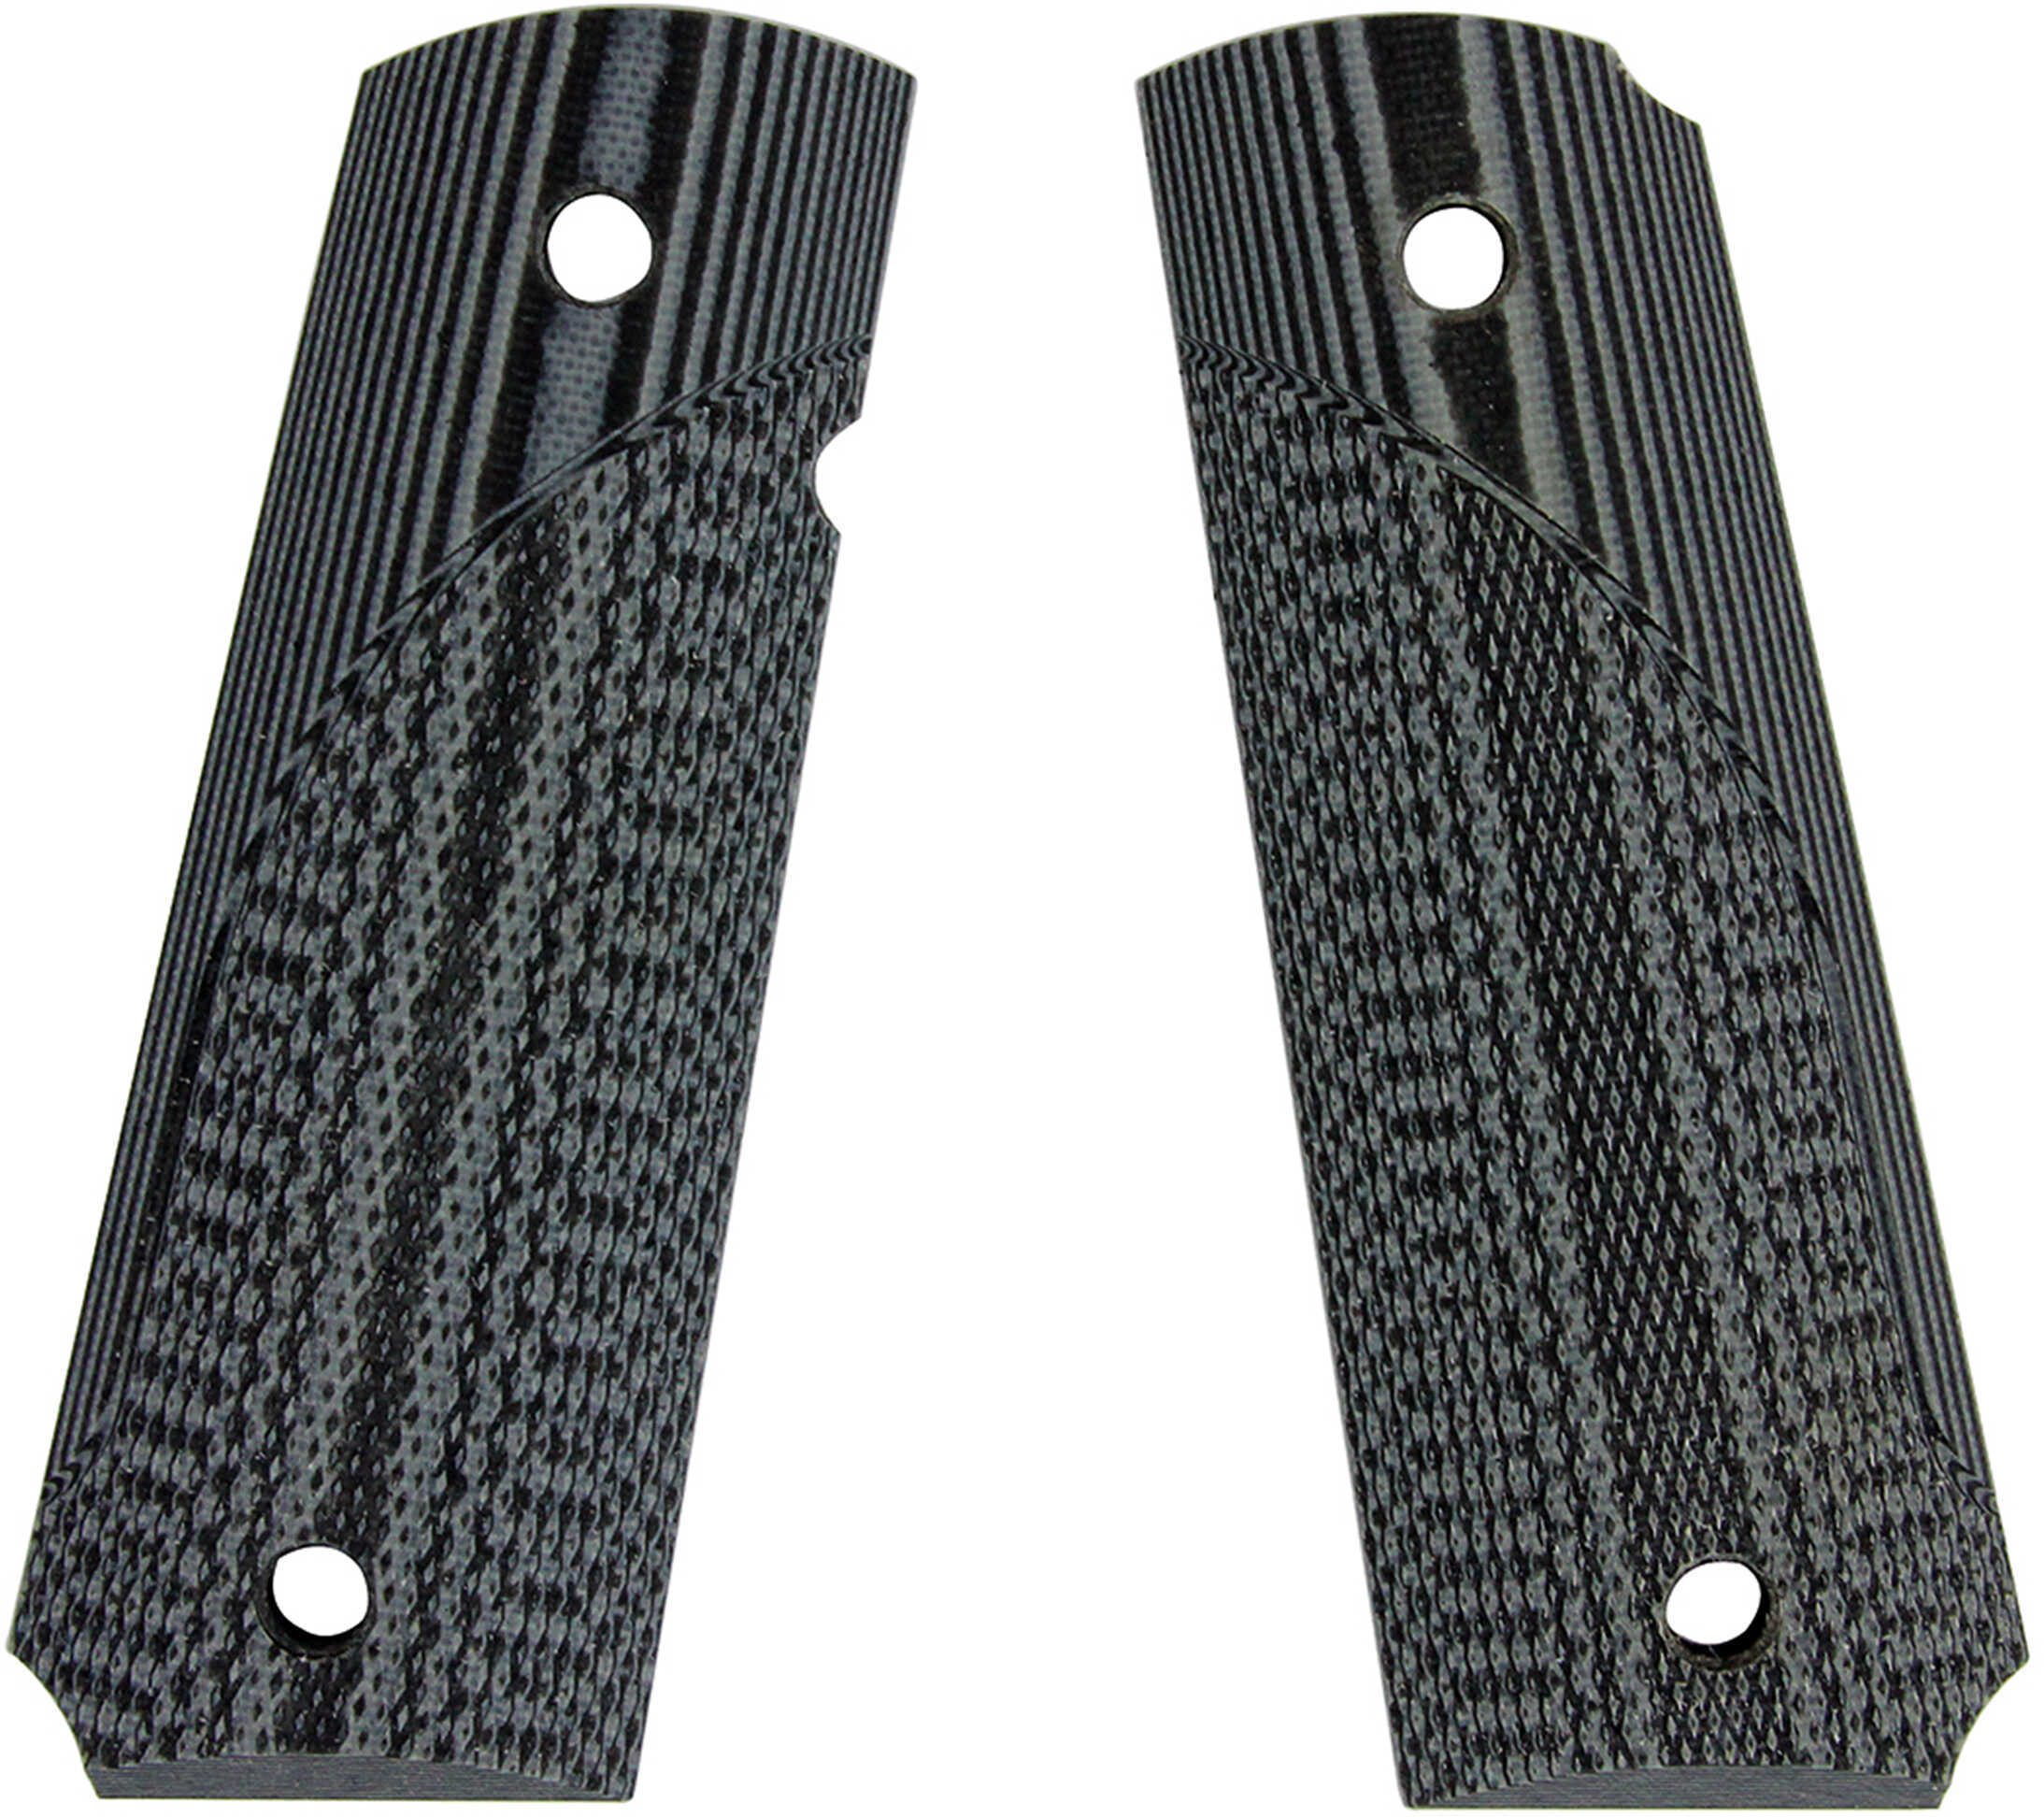 Pachmayr G-10 Tactical Pistol Grips 1911, Gray/Black, Fine Md: 61001